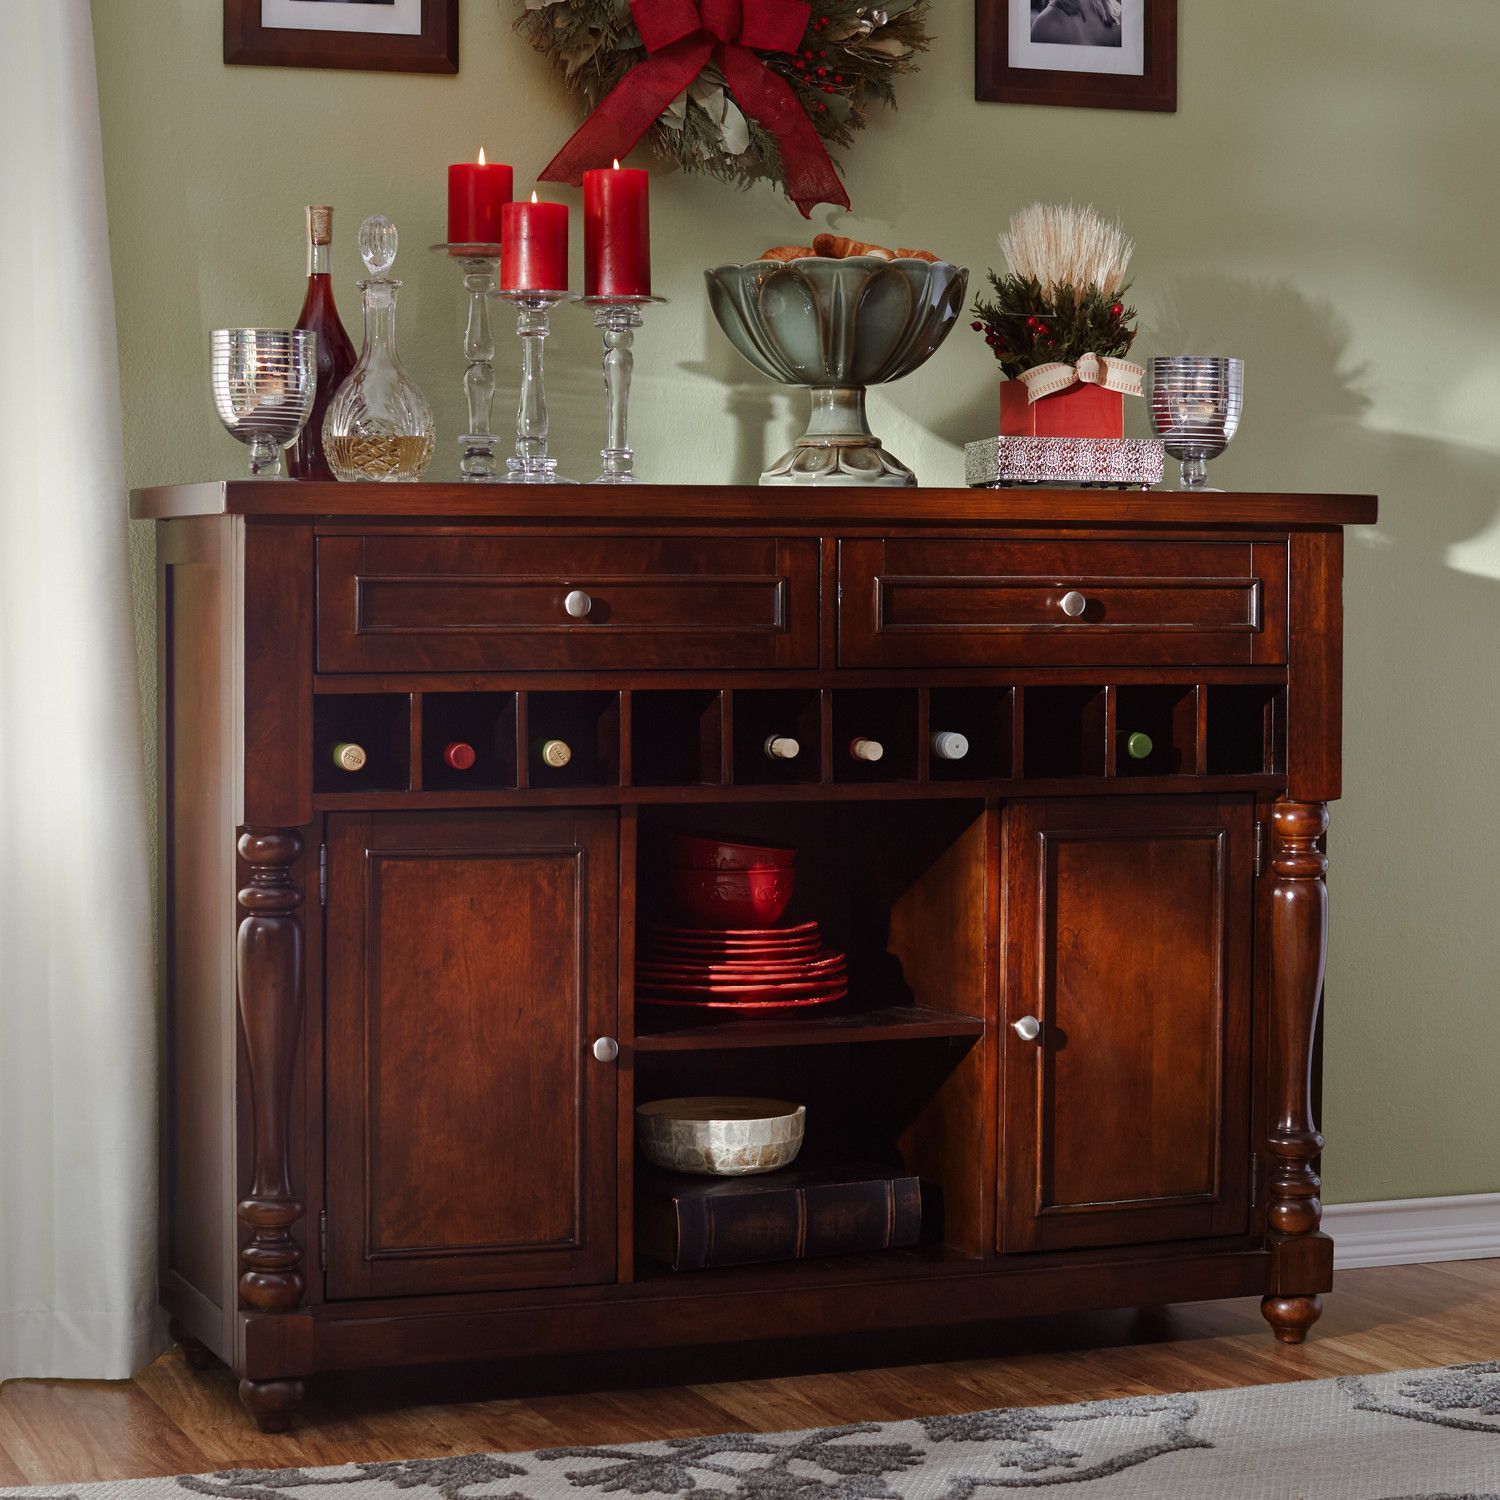 Lanesboro 54" Wide 2 Drawer Sideboard | Kitchen Dining Intended For Sandweiler 54" Wide 2 Drawer Sideboards (View 1 of 15)